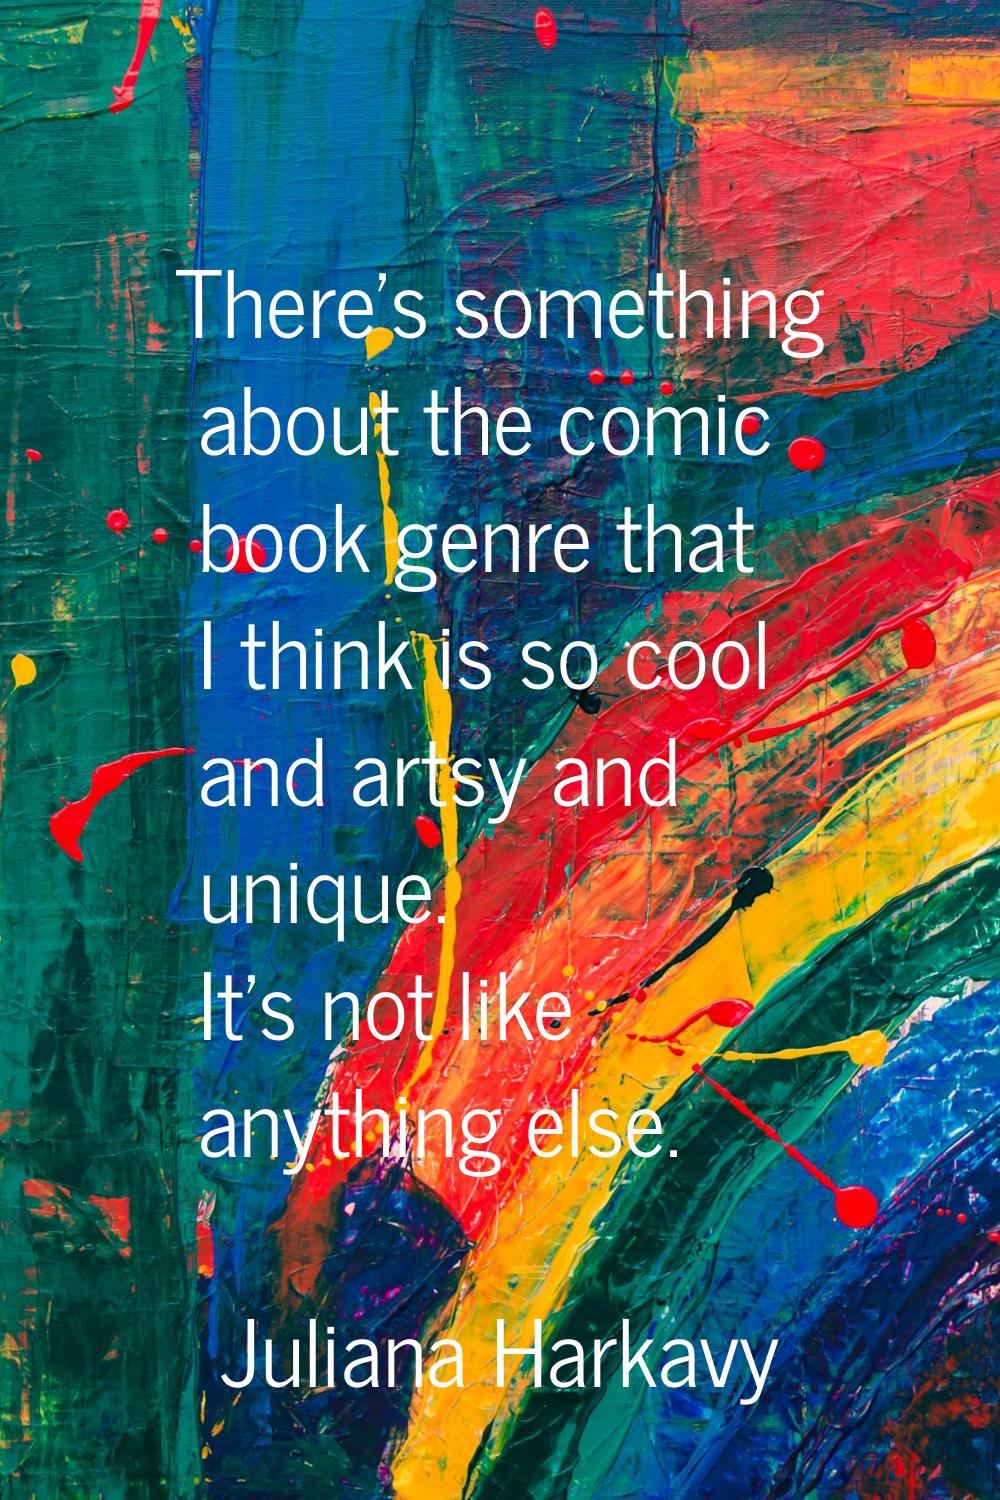 There's something about the comic book genre that I think is so cool and artsy and unique. It's not